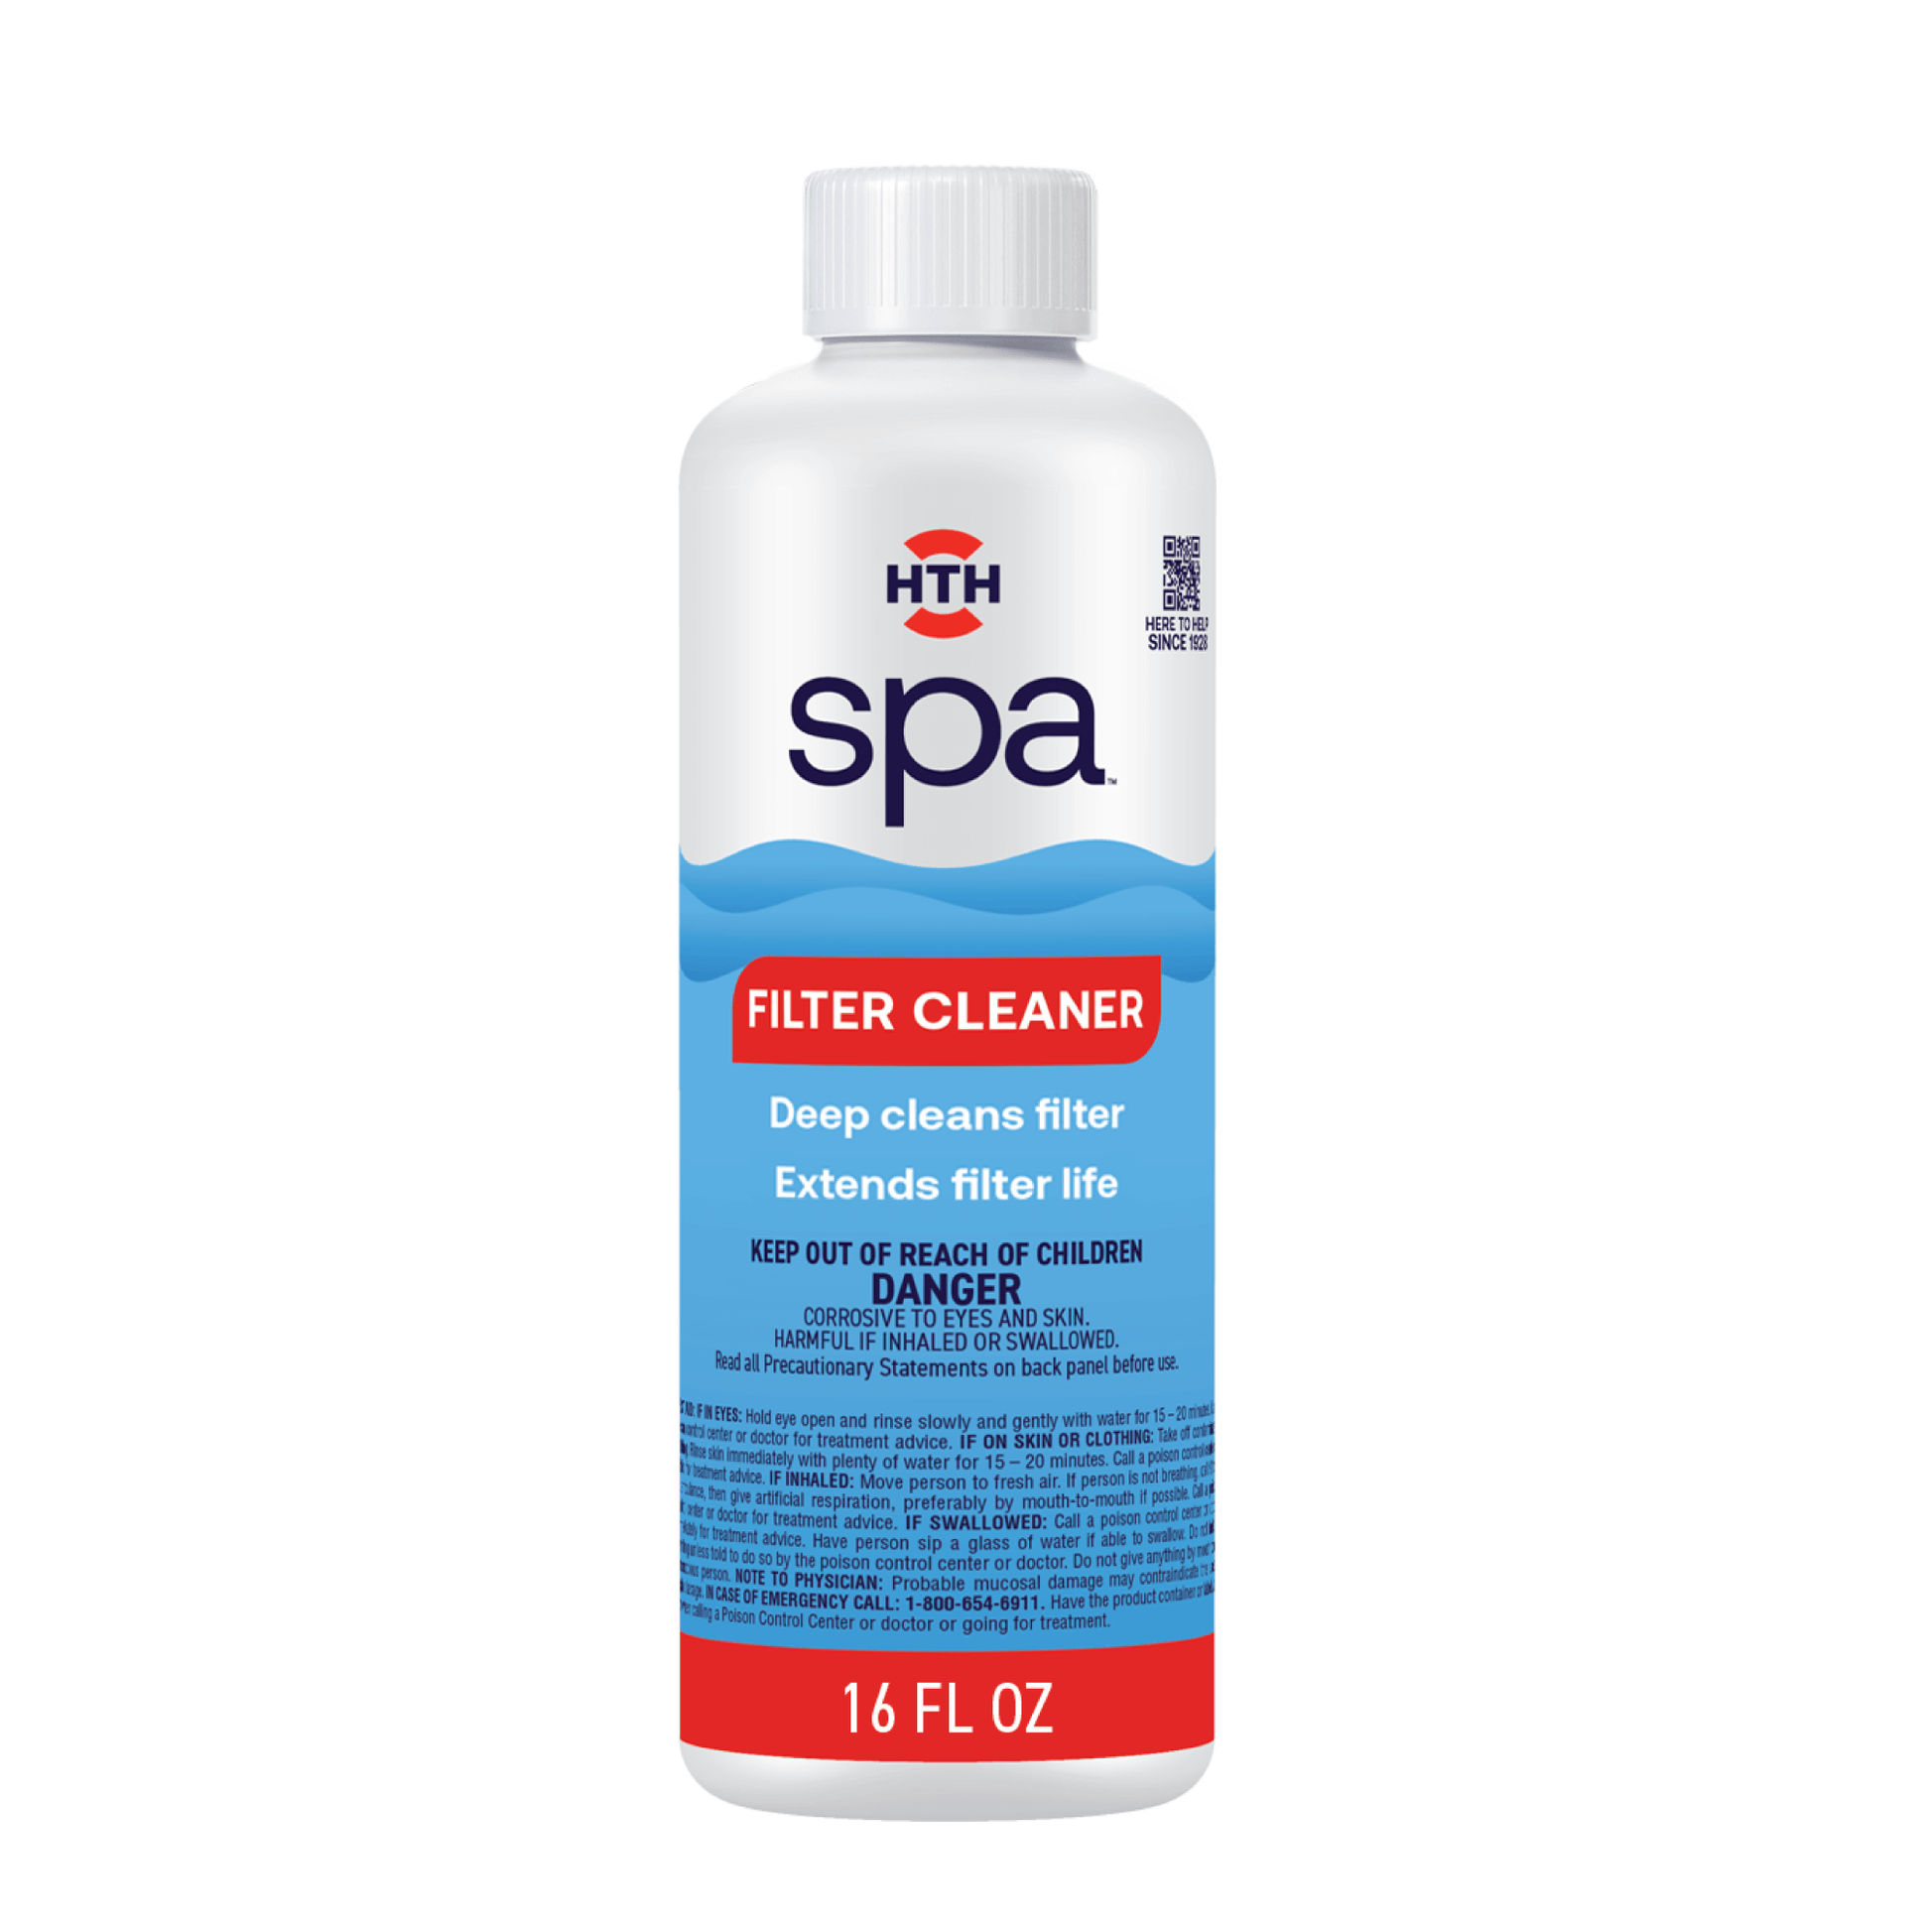 A 16 oz plastic bottle of HTH Spa hot tub filter cleaner for spa treatment